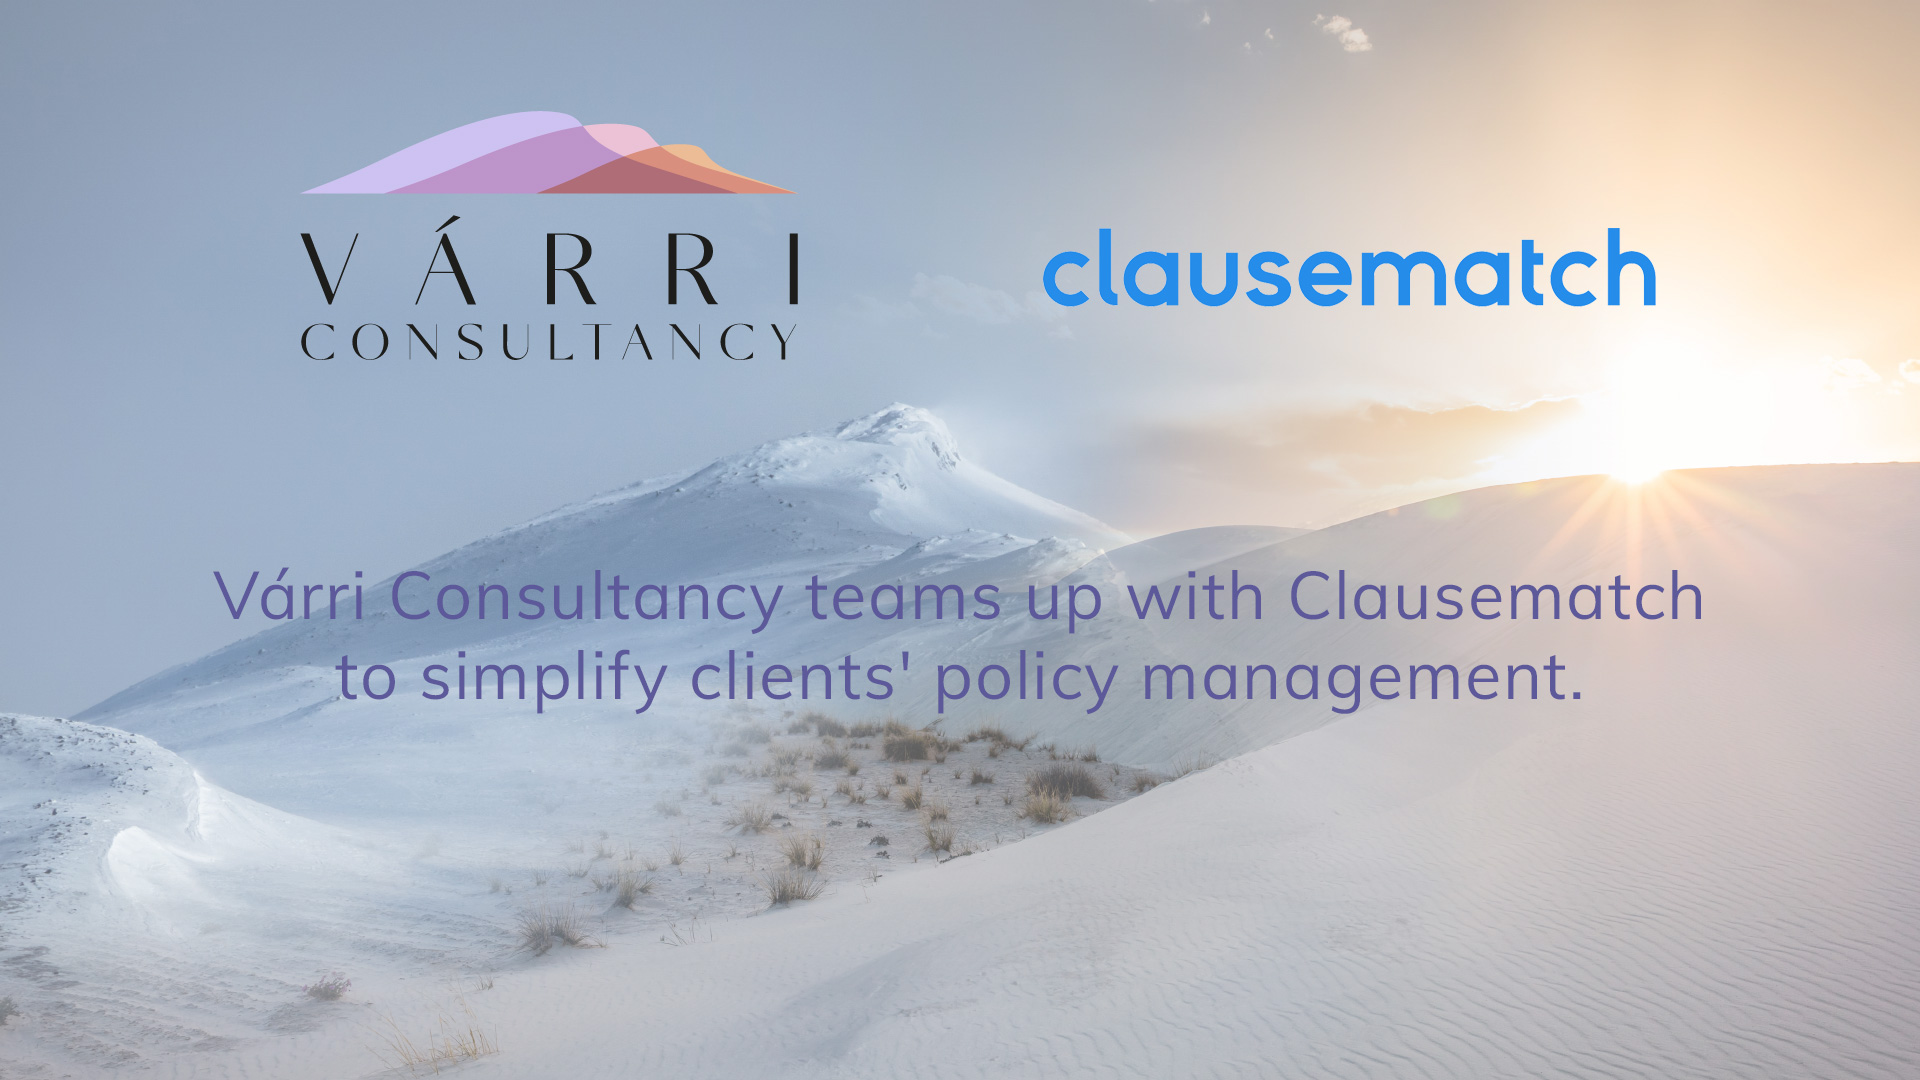 Várri Consultancy Partners with Clausematch to Provide Compliance Automation Technology to SMEs in the Middle East